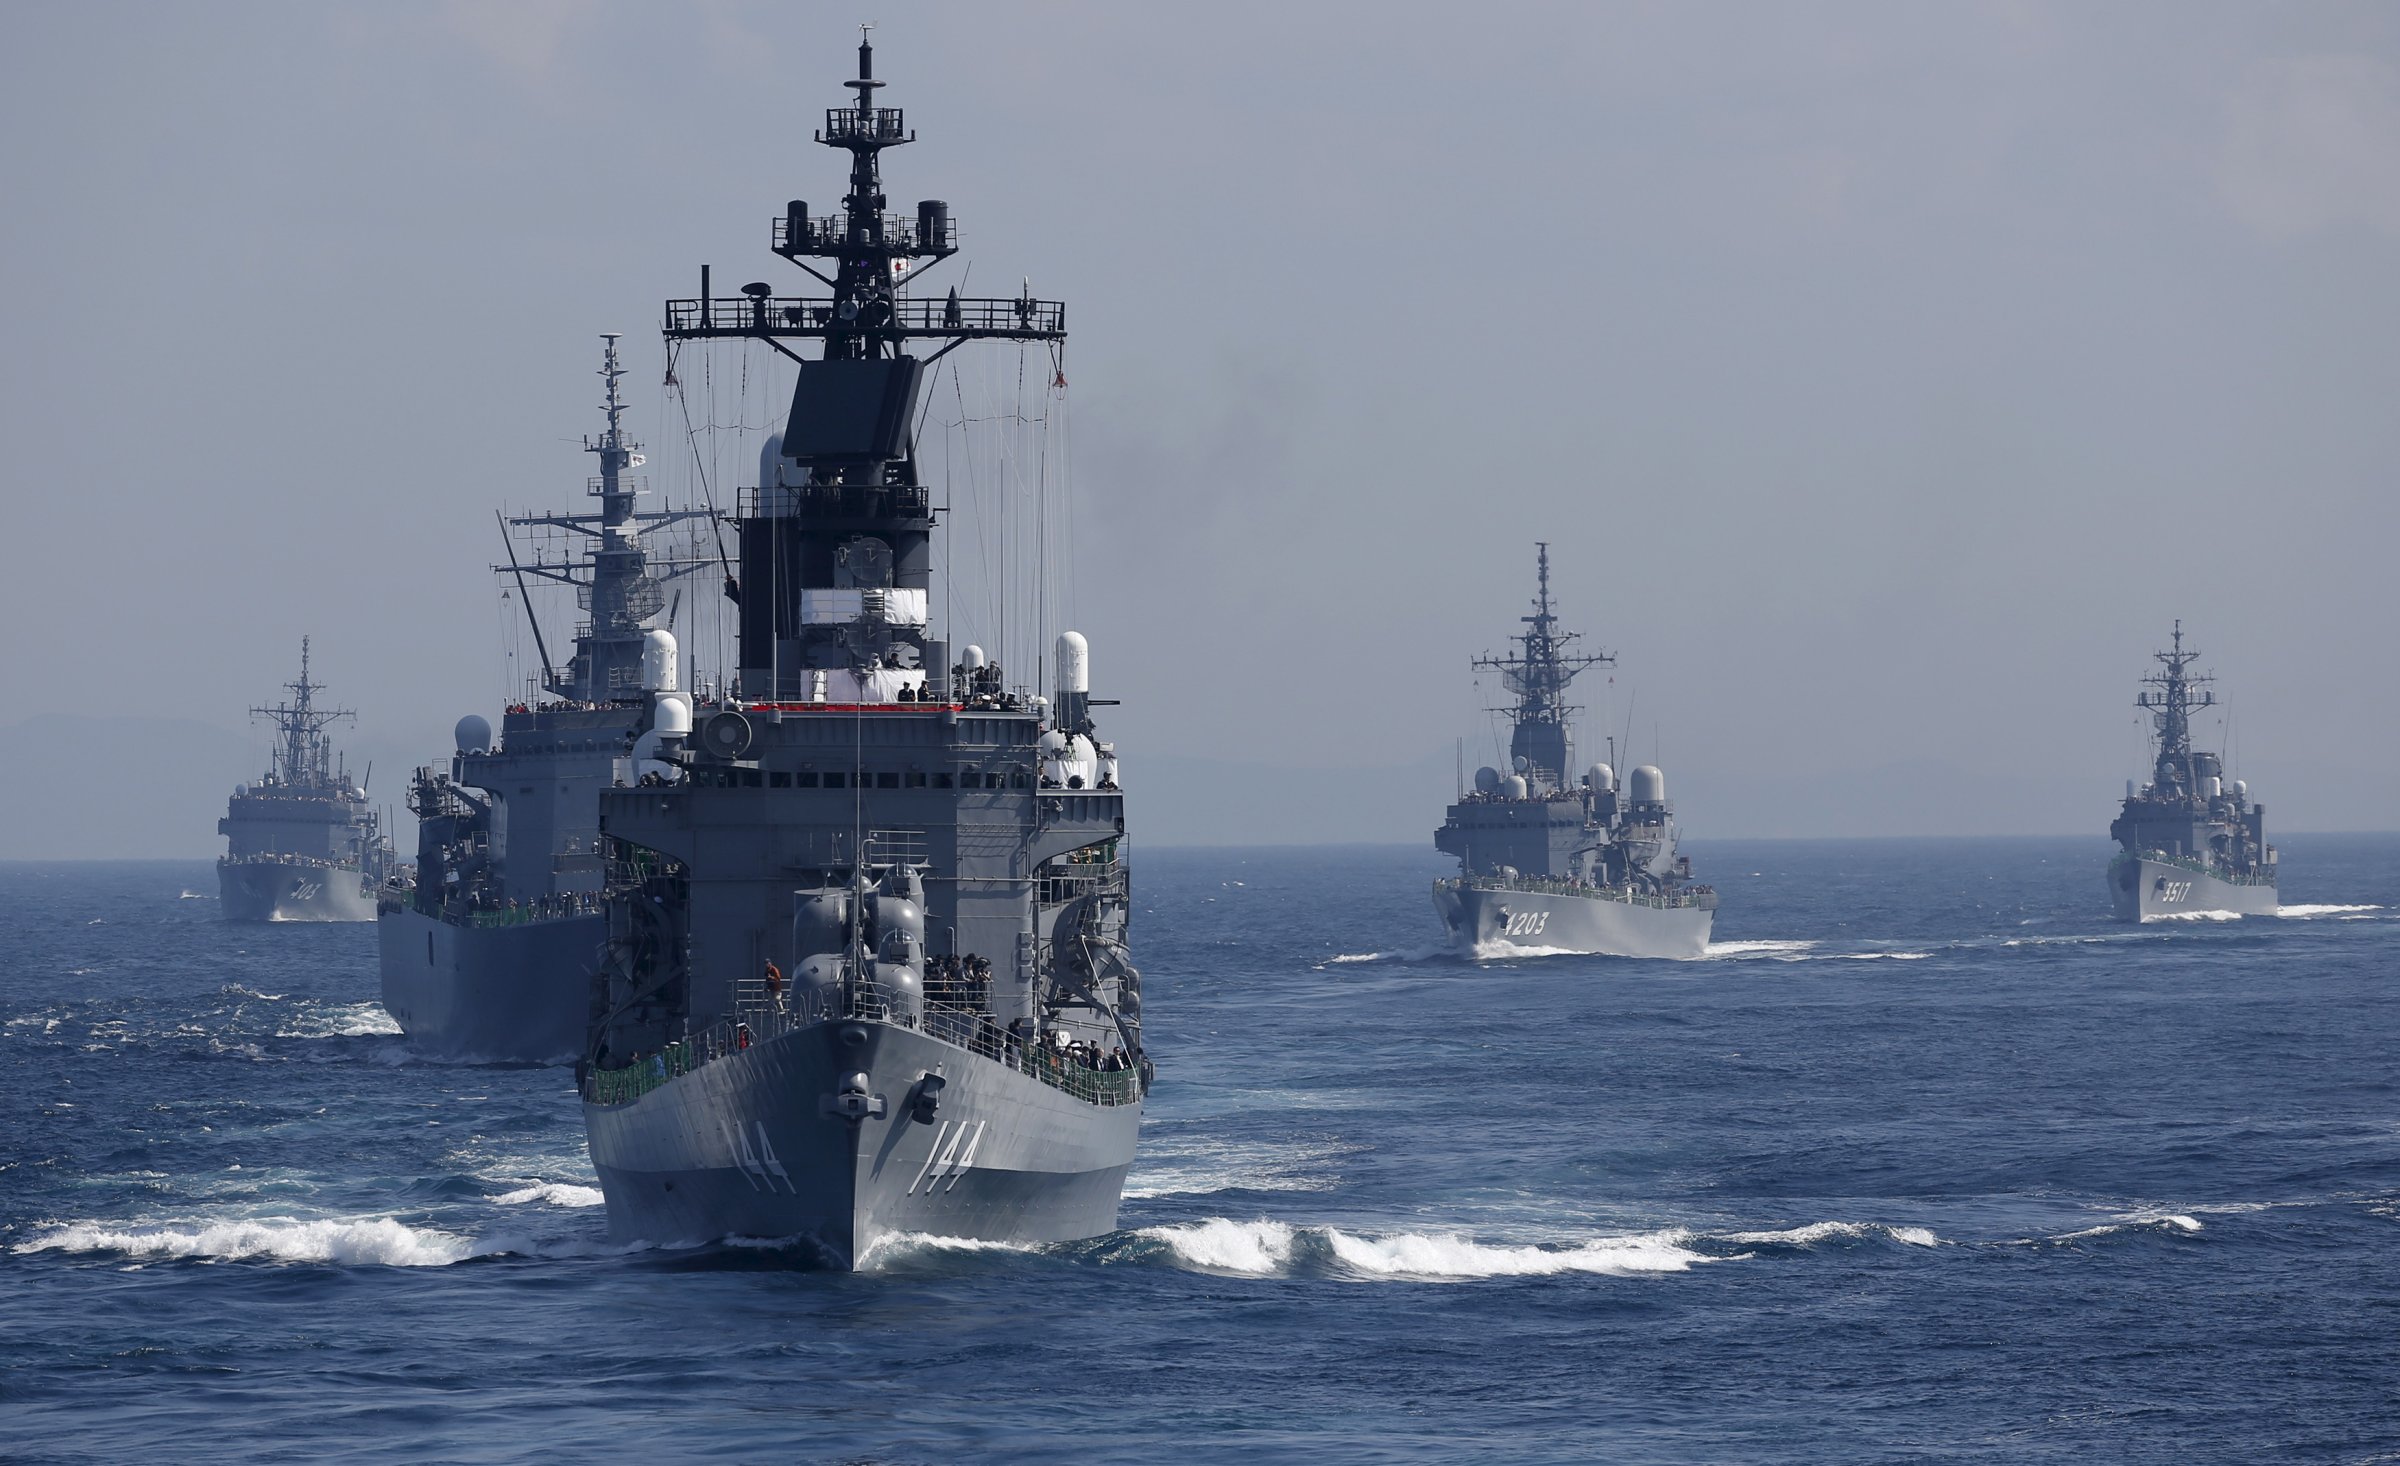 JMSDF destroyer Kurama, which is carrying Japan's PM Abe,  leads the MSDF fleet during its fleet review at Sagami Bay, off Yokosuka